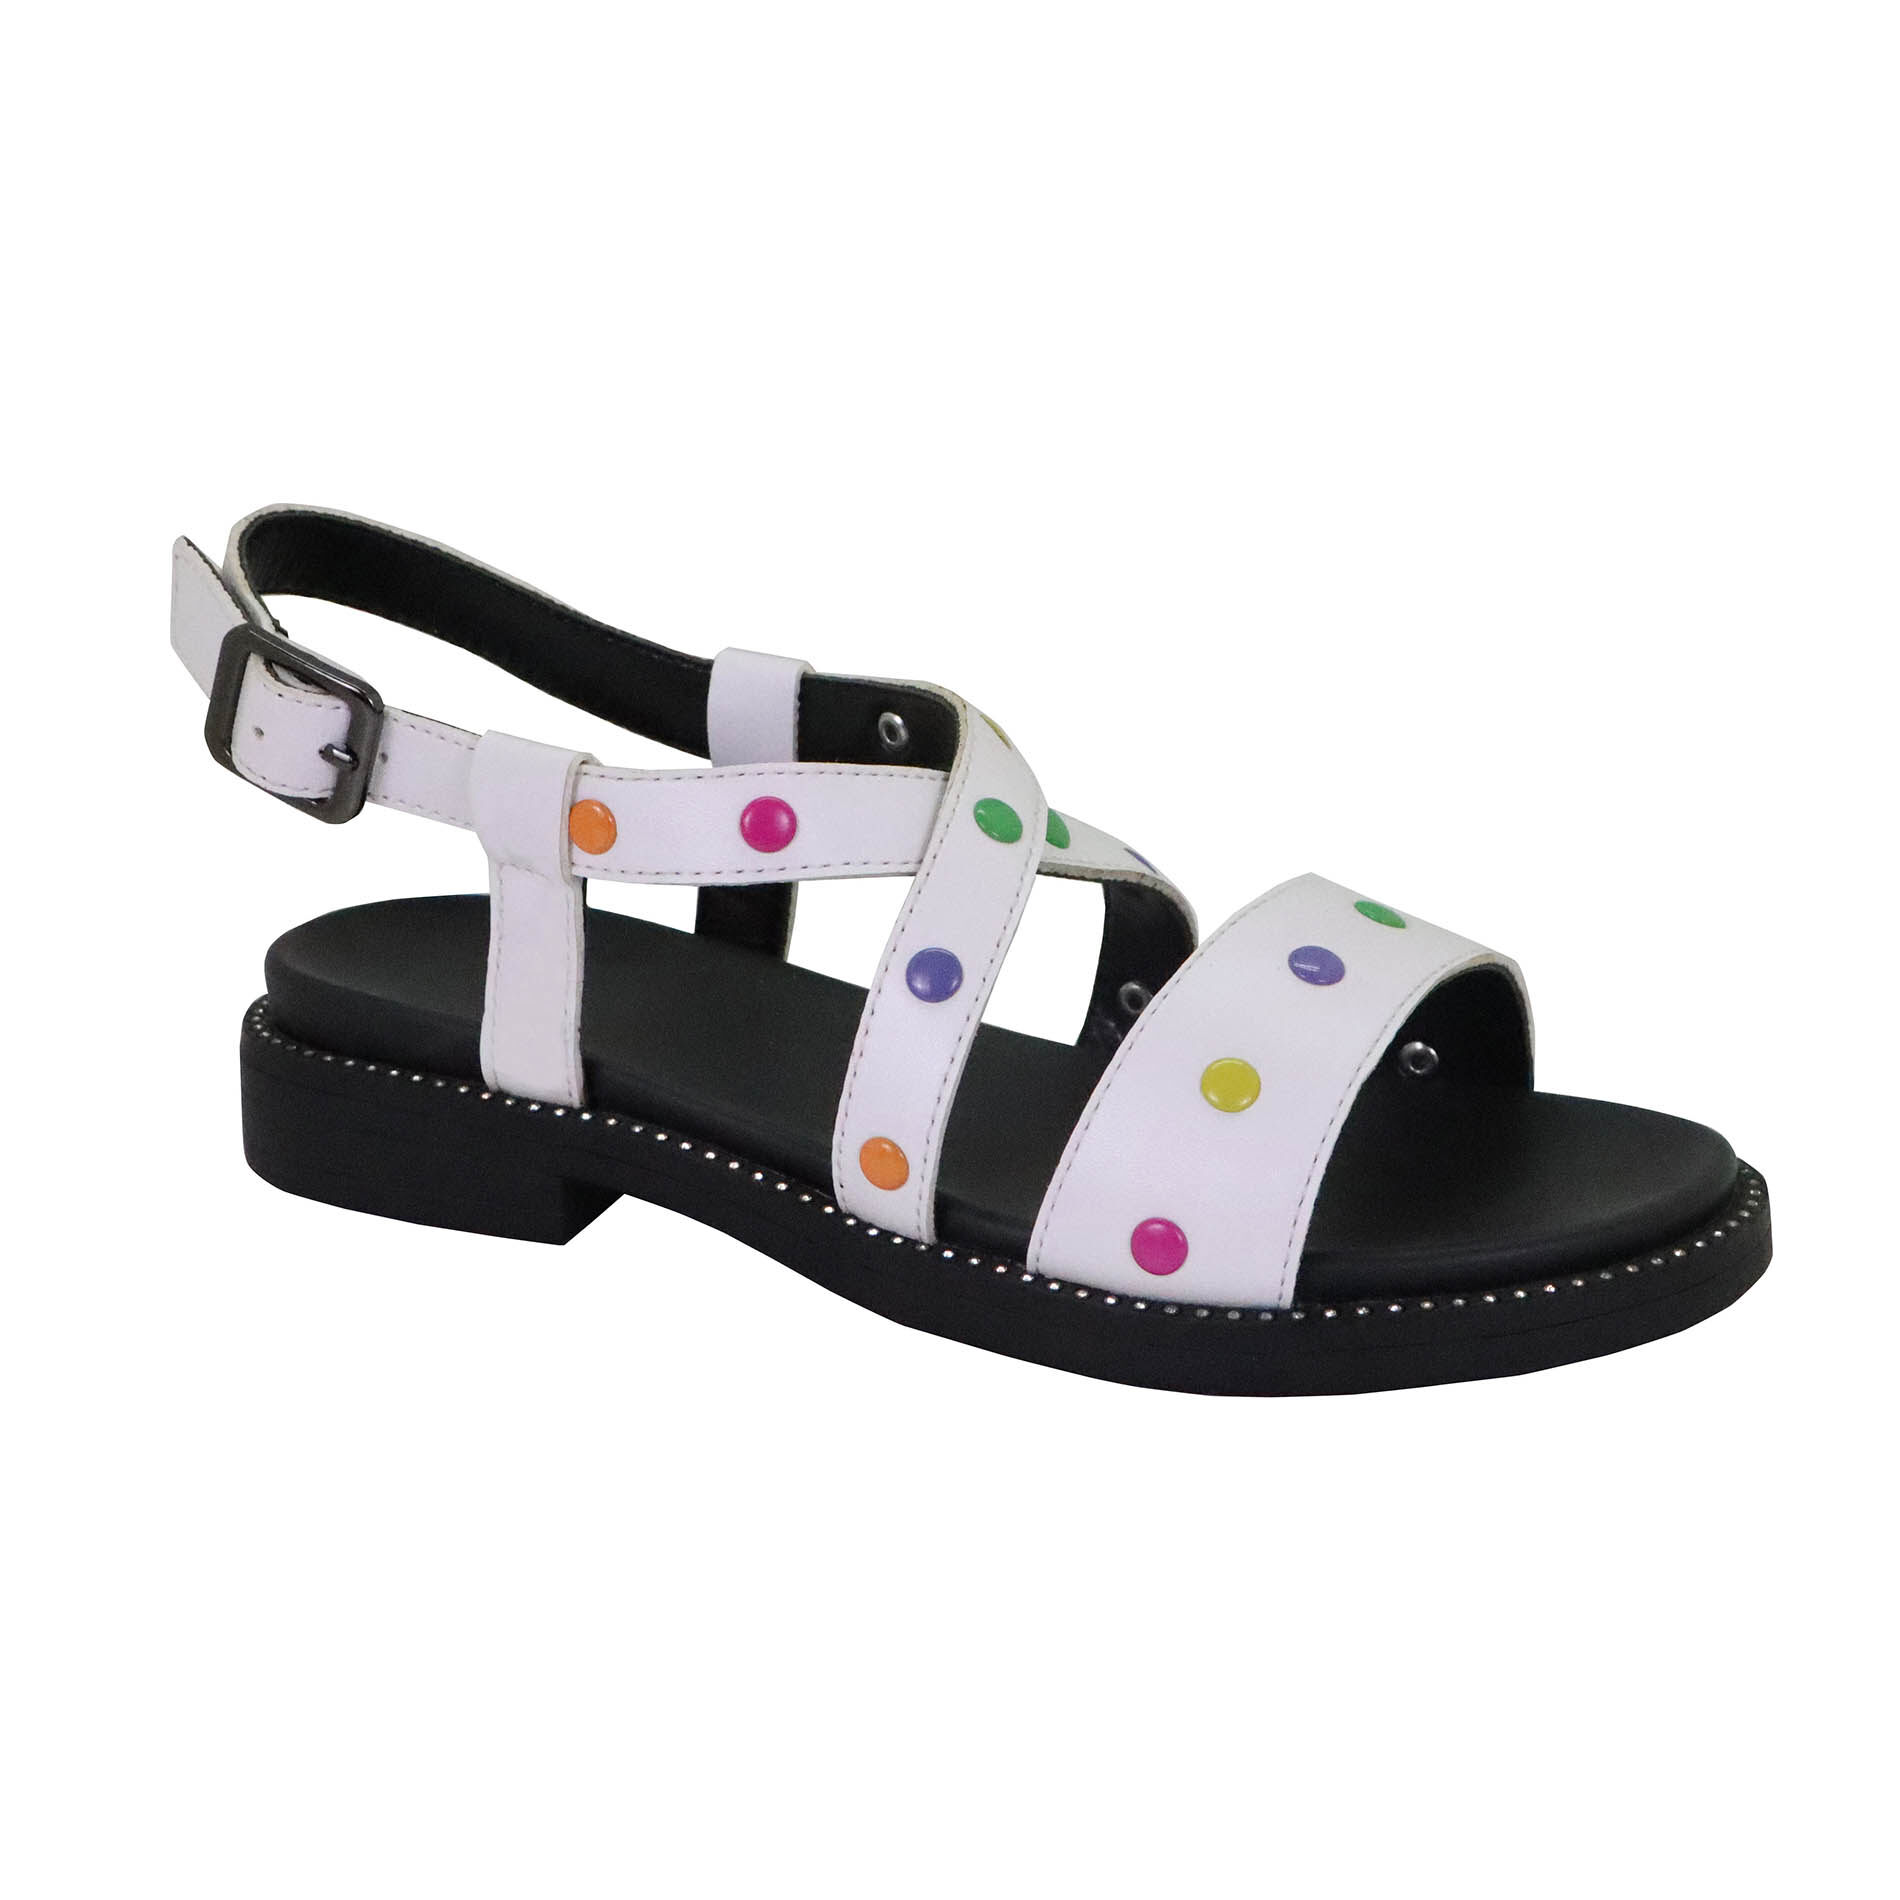 Support New fashion customized Children's Comfort sandals